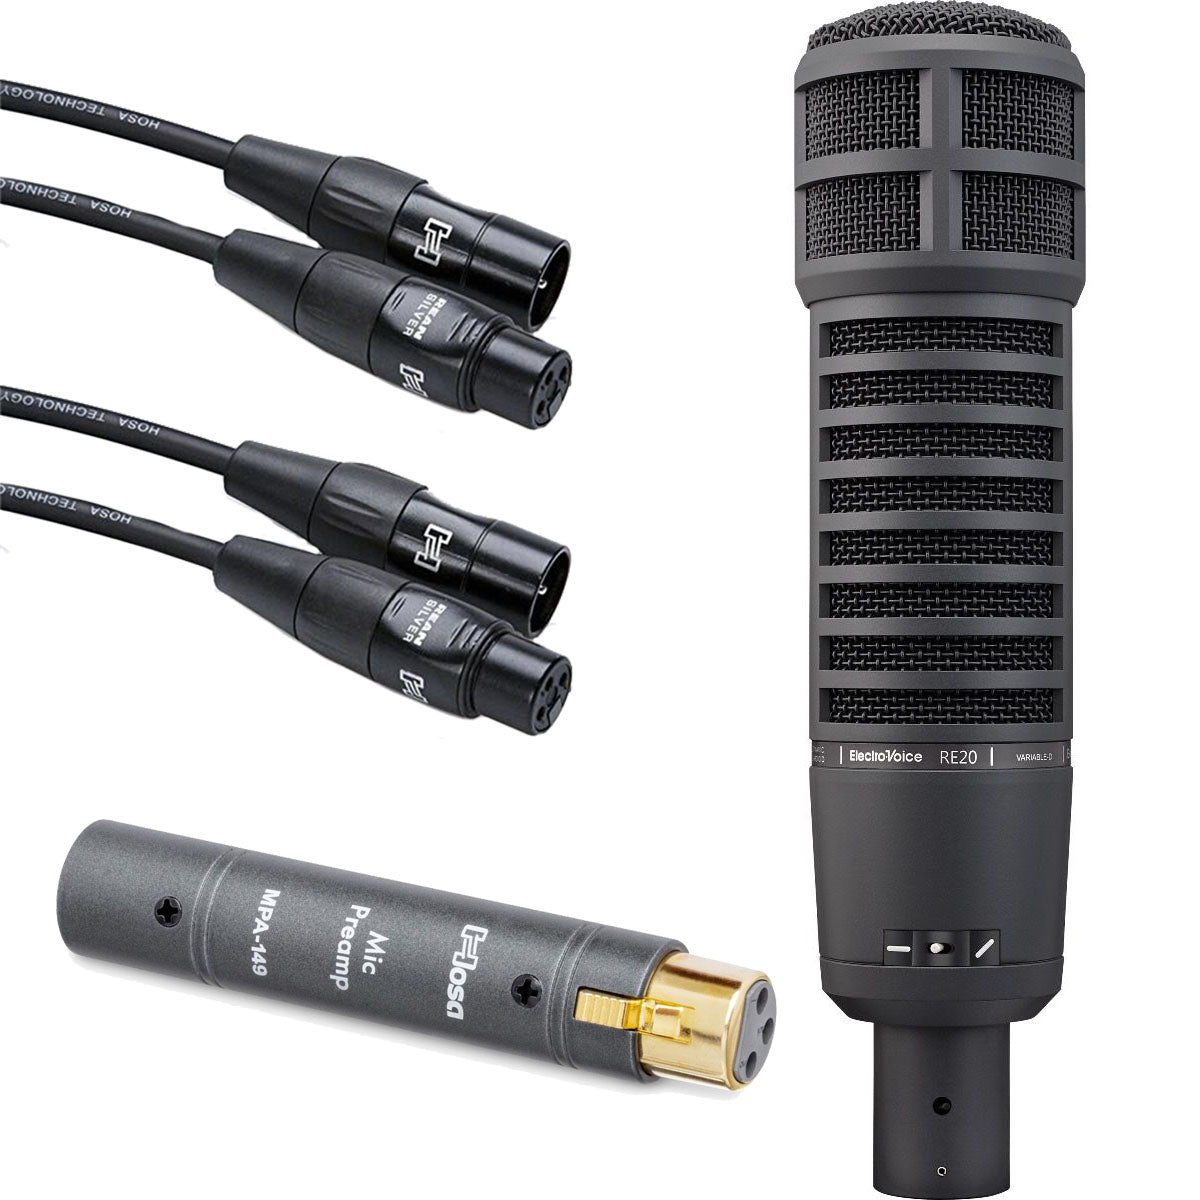 Collage image of the Electro-Voice RE20 Large-Diaphragm Dynamic Microphone - Black PREAMP PAK